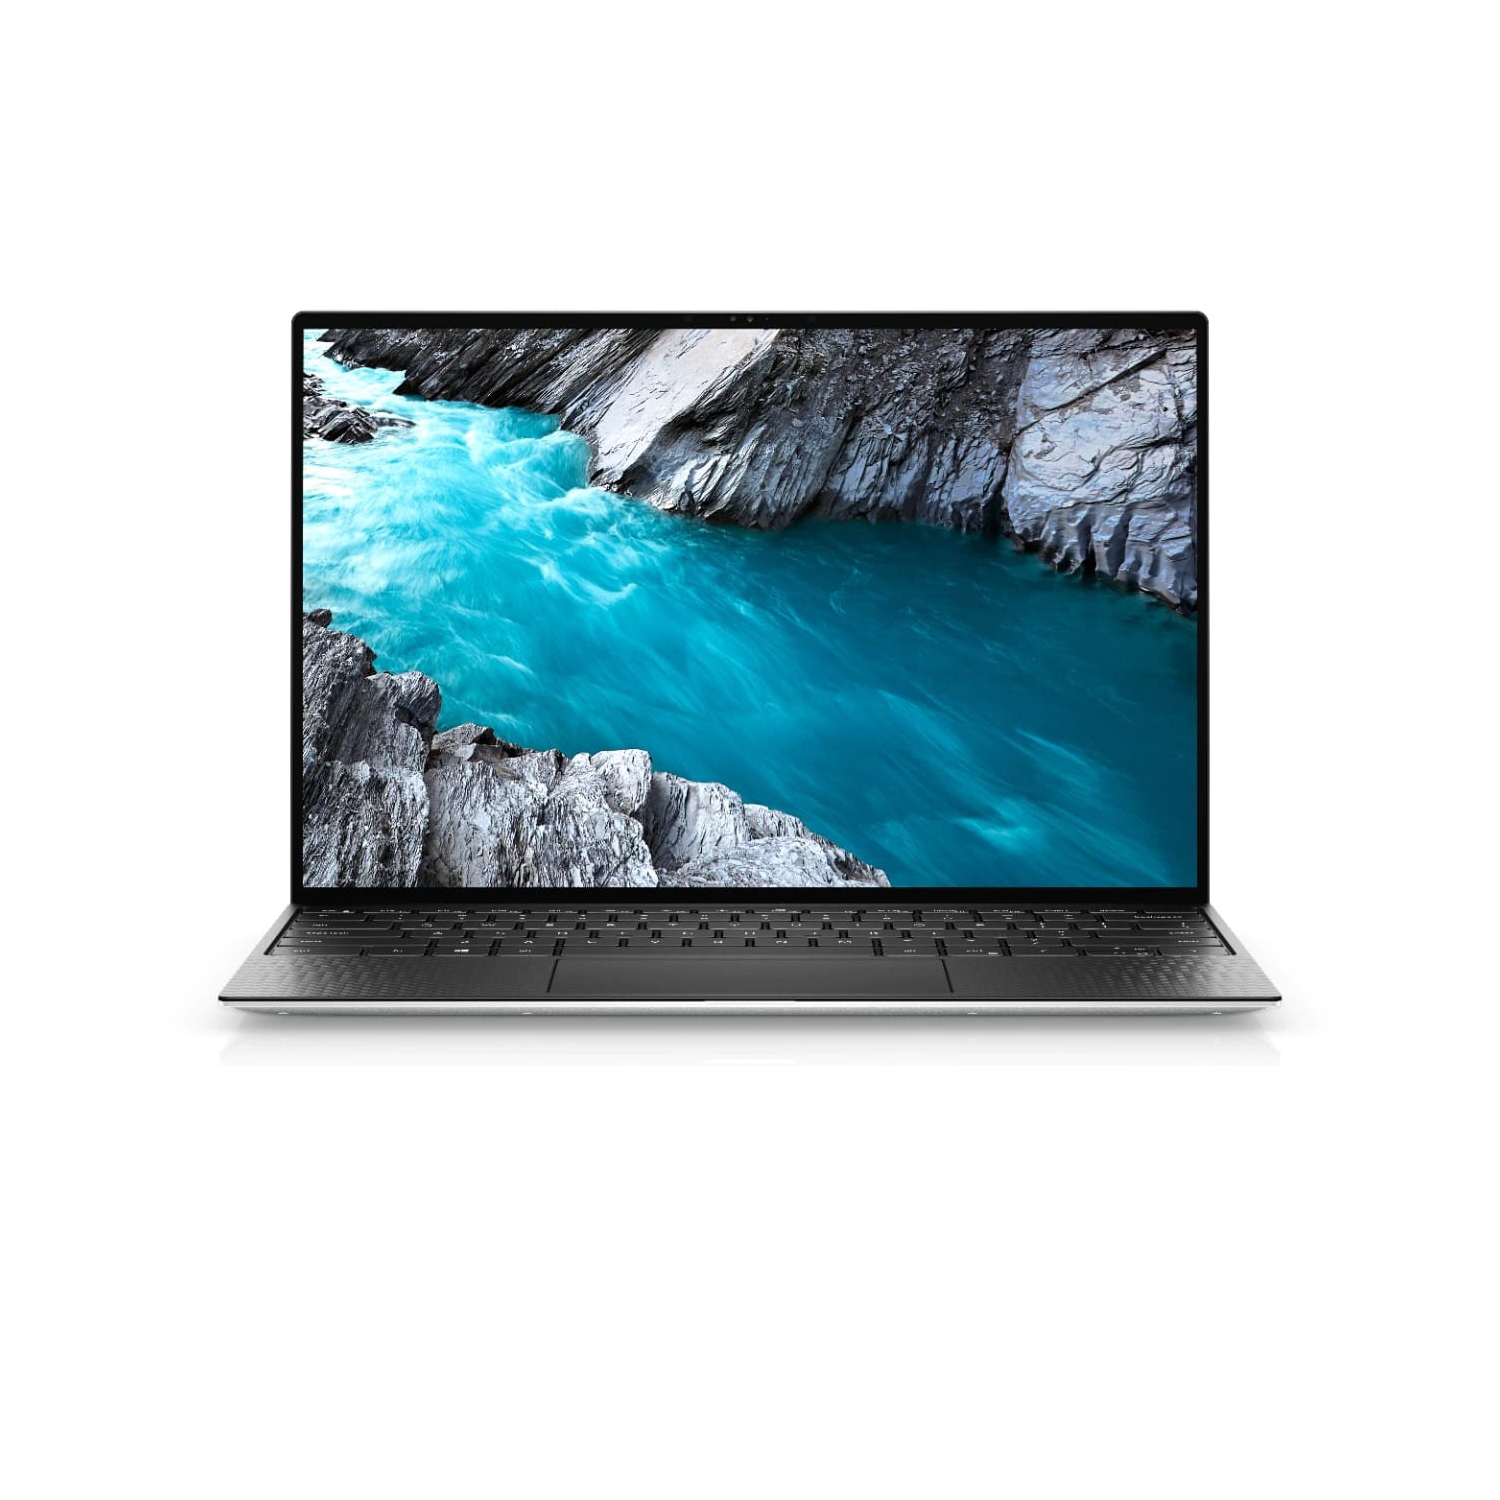 Refurbished (Excellent) - Dell XPS 13 9300 Laptop (2020) | 13.3" FHD+ | Core i5 - 256GB SSD - 16GB RAM | 4 Cores @ 3.6 GHz - 10th Gen CPU Certified Refurbished